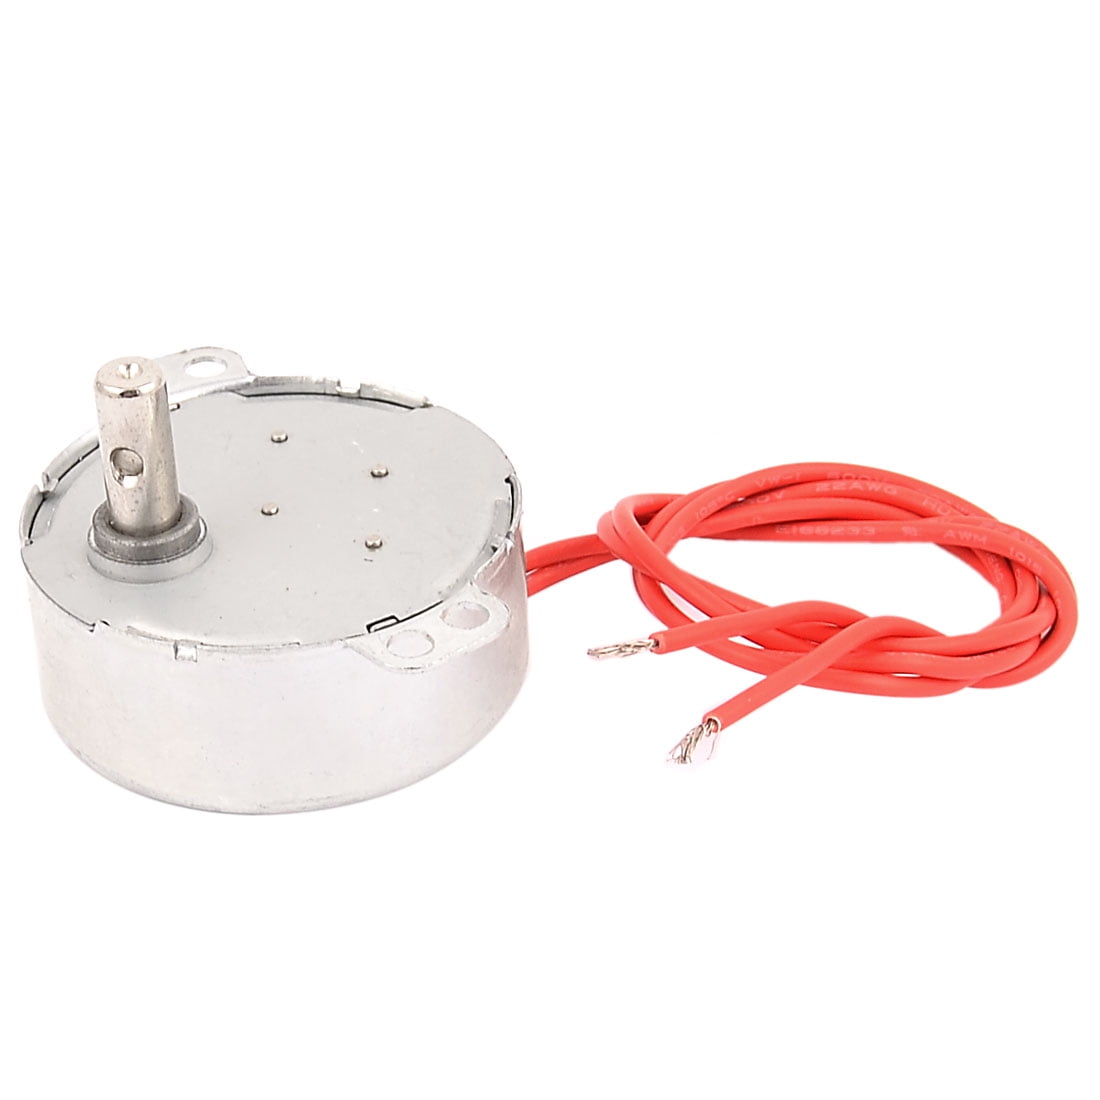 uxcell Metal Gear Synchronous Synchron Motor AC 12V 45-54RPM 50-60Hz CCW/CW 4W for Microwave Oven 